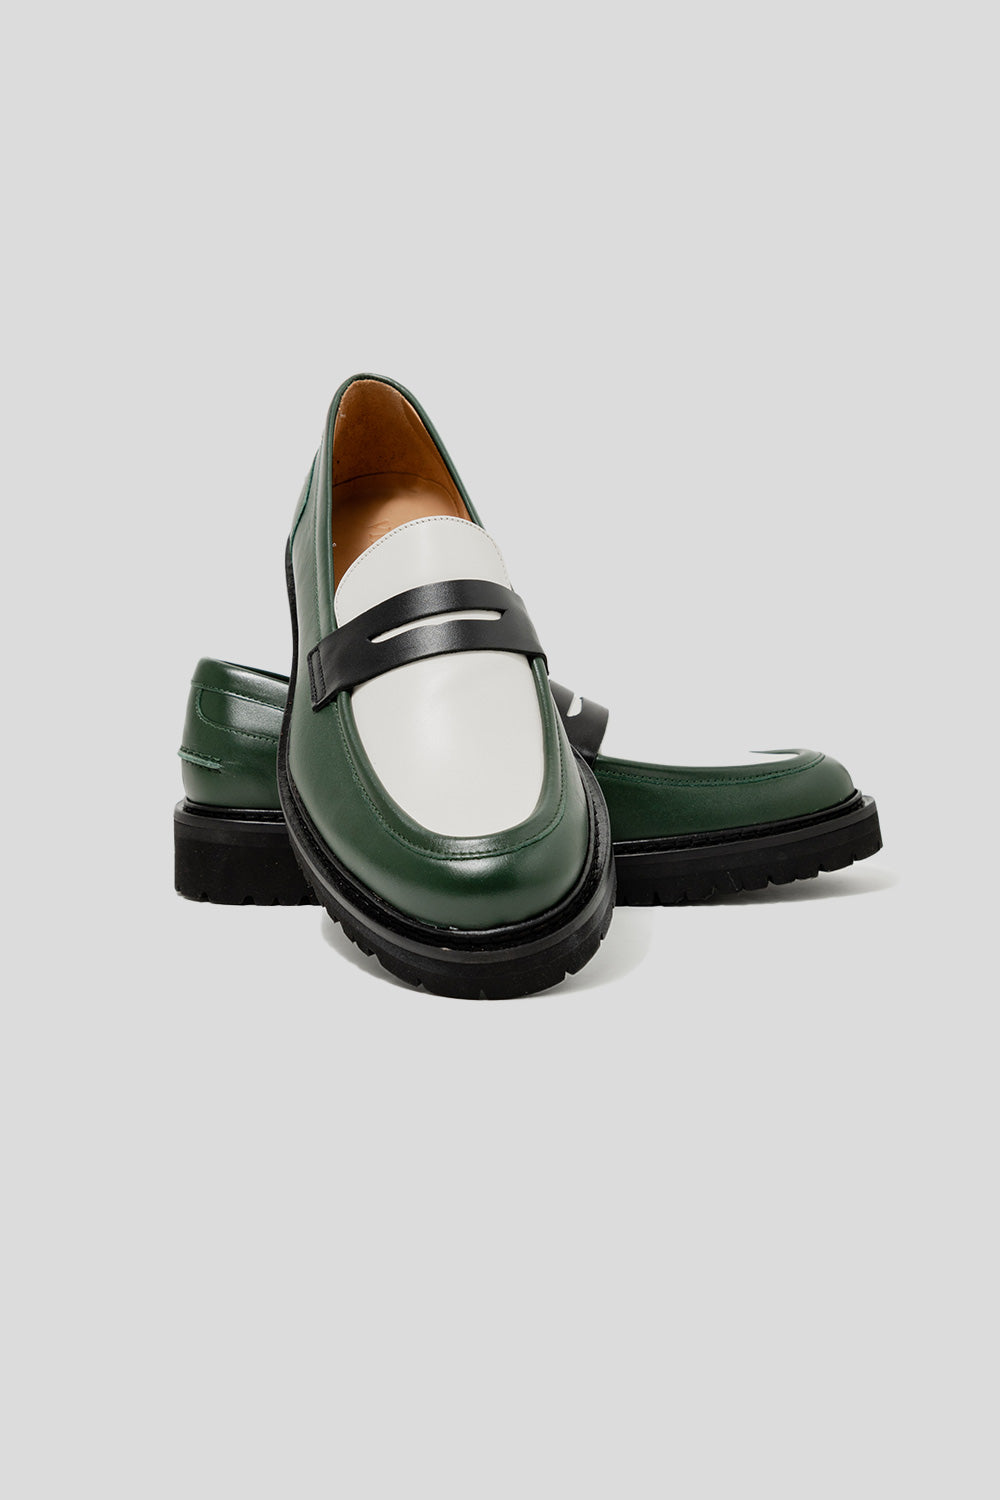 Vinny's Richee Penny Loafer in Green/White/Black | Wallace Mercantile